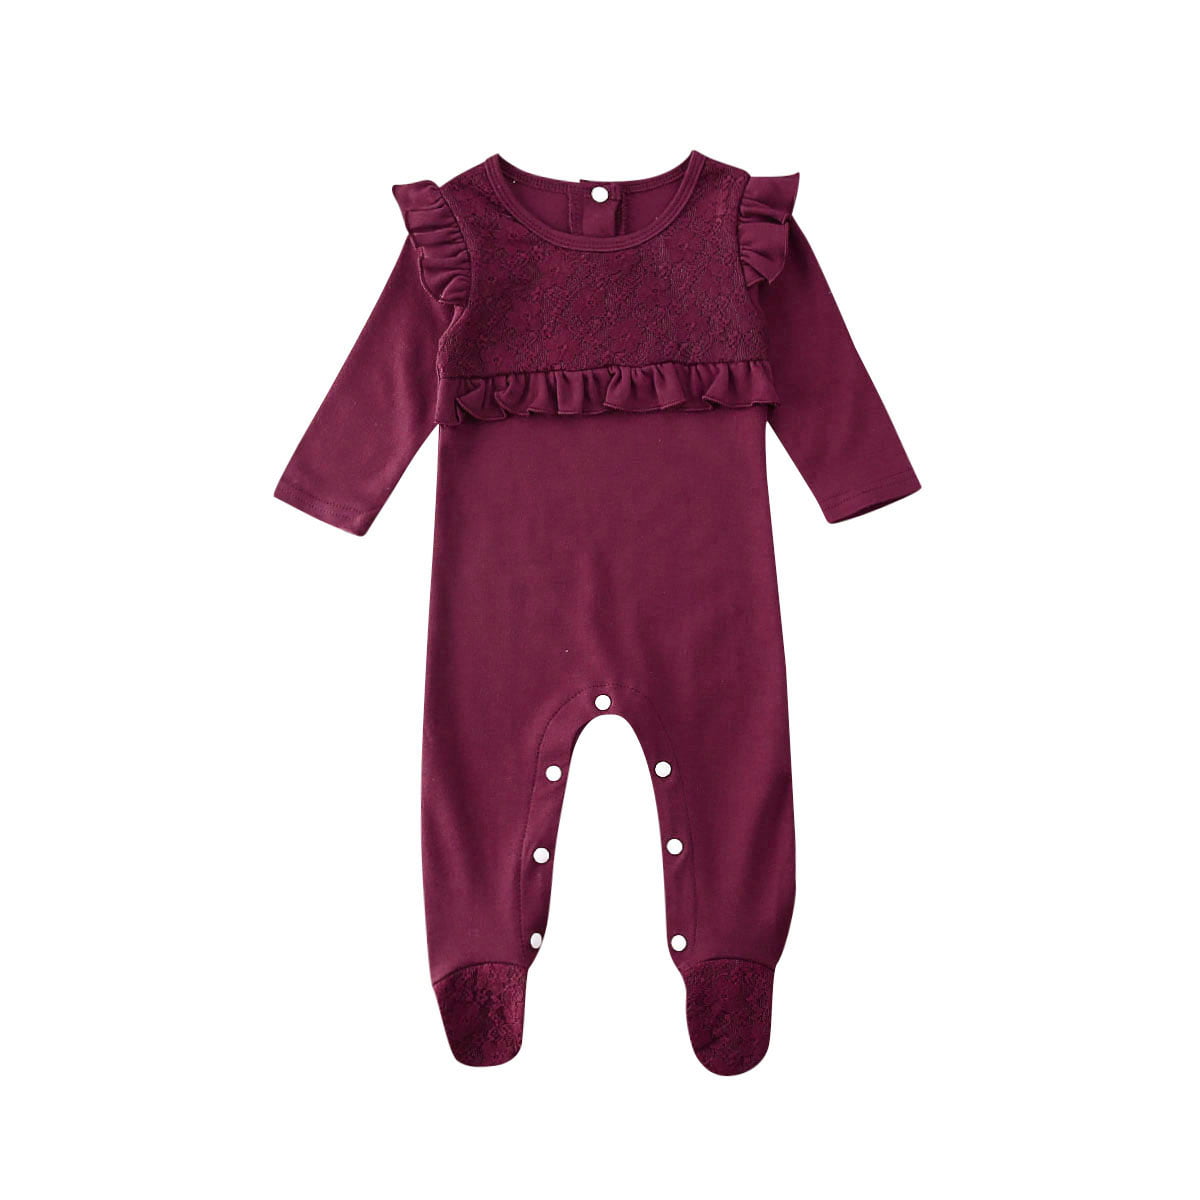 Details about   Toddler Kids Baby Boys Girls Long Sleeve Costume Romper  Warm Jumsuit Playsuit 